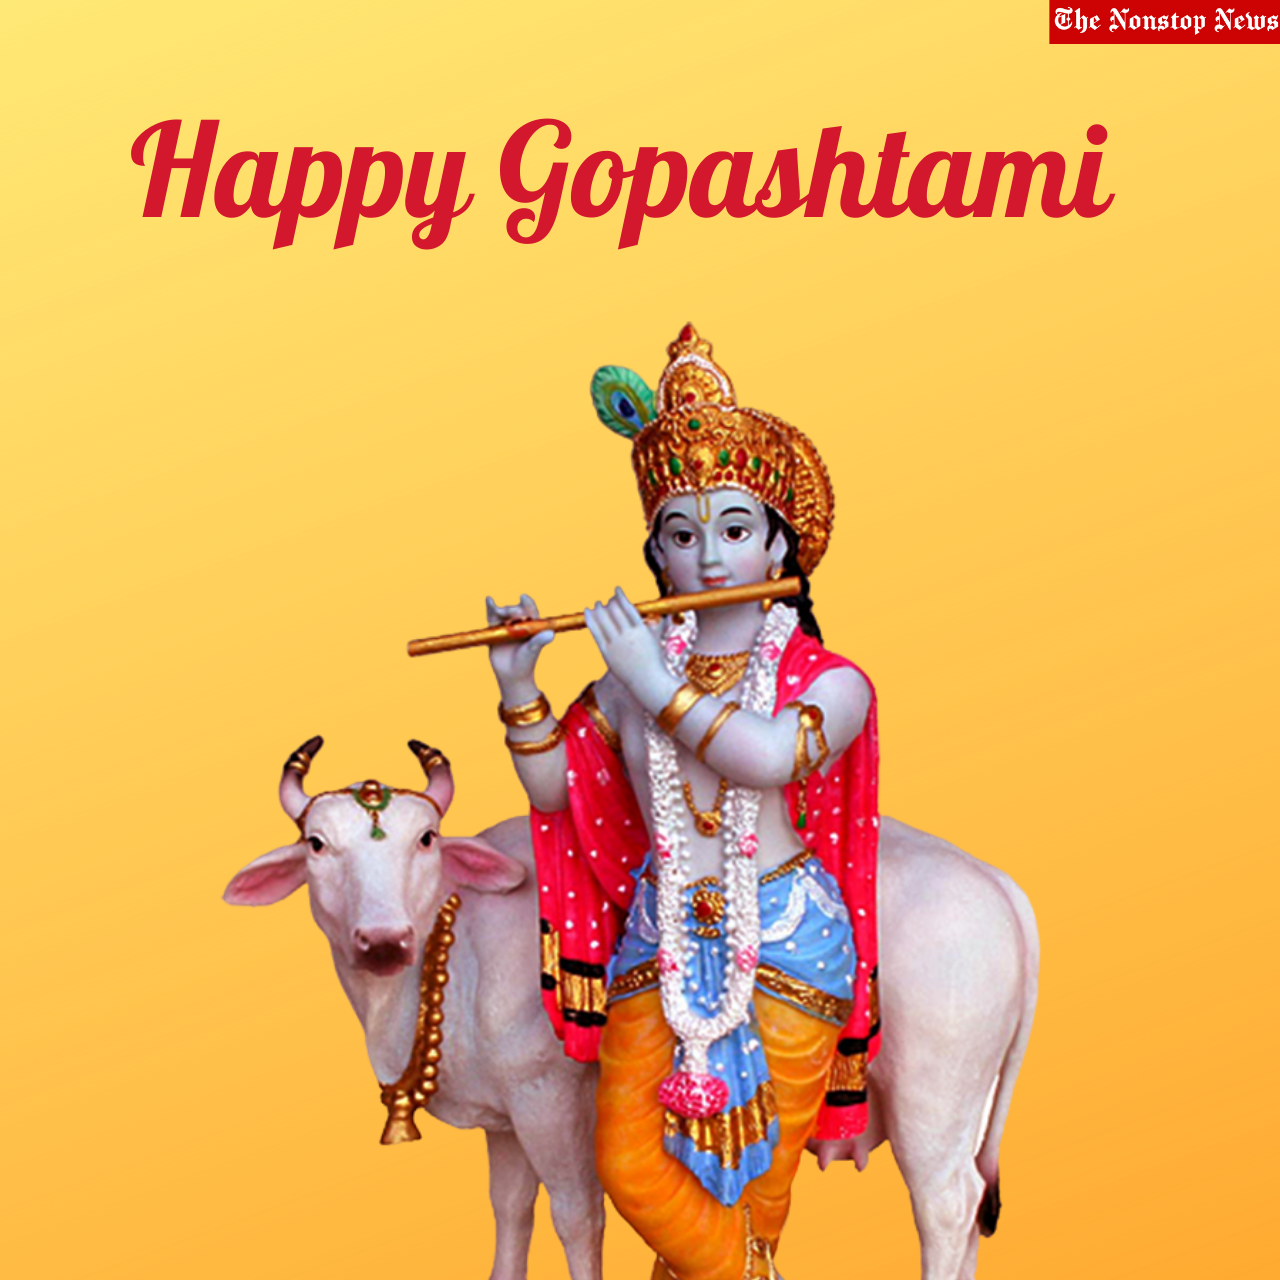 Gopashtami 2021 Wishes, Greetings, Messages, HD Images, and Quotes to Share